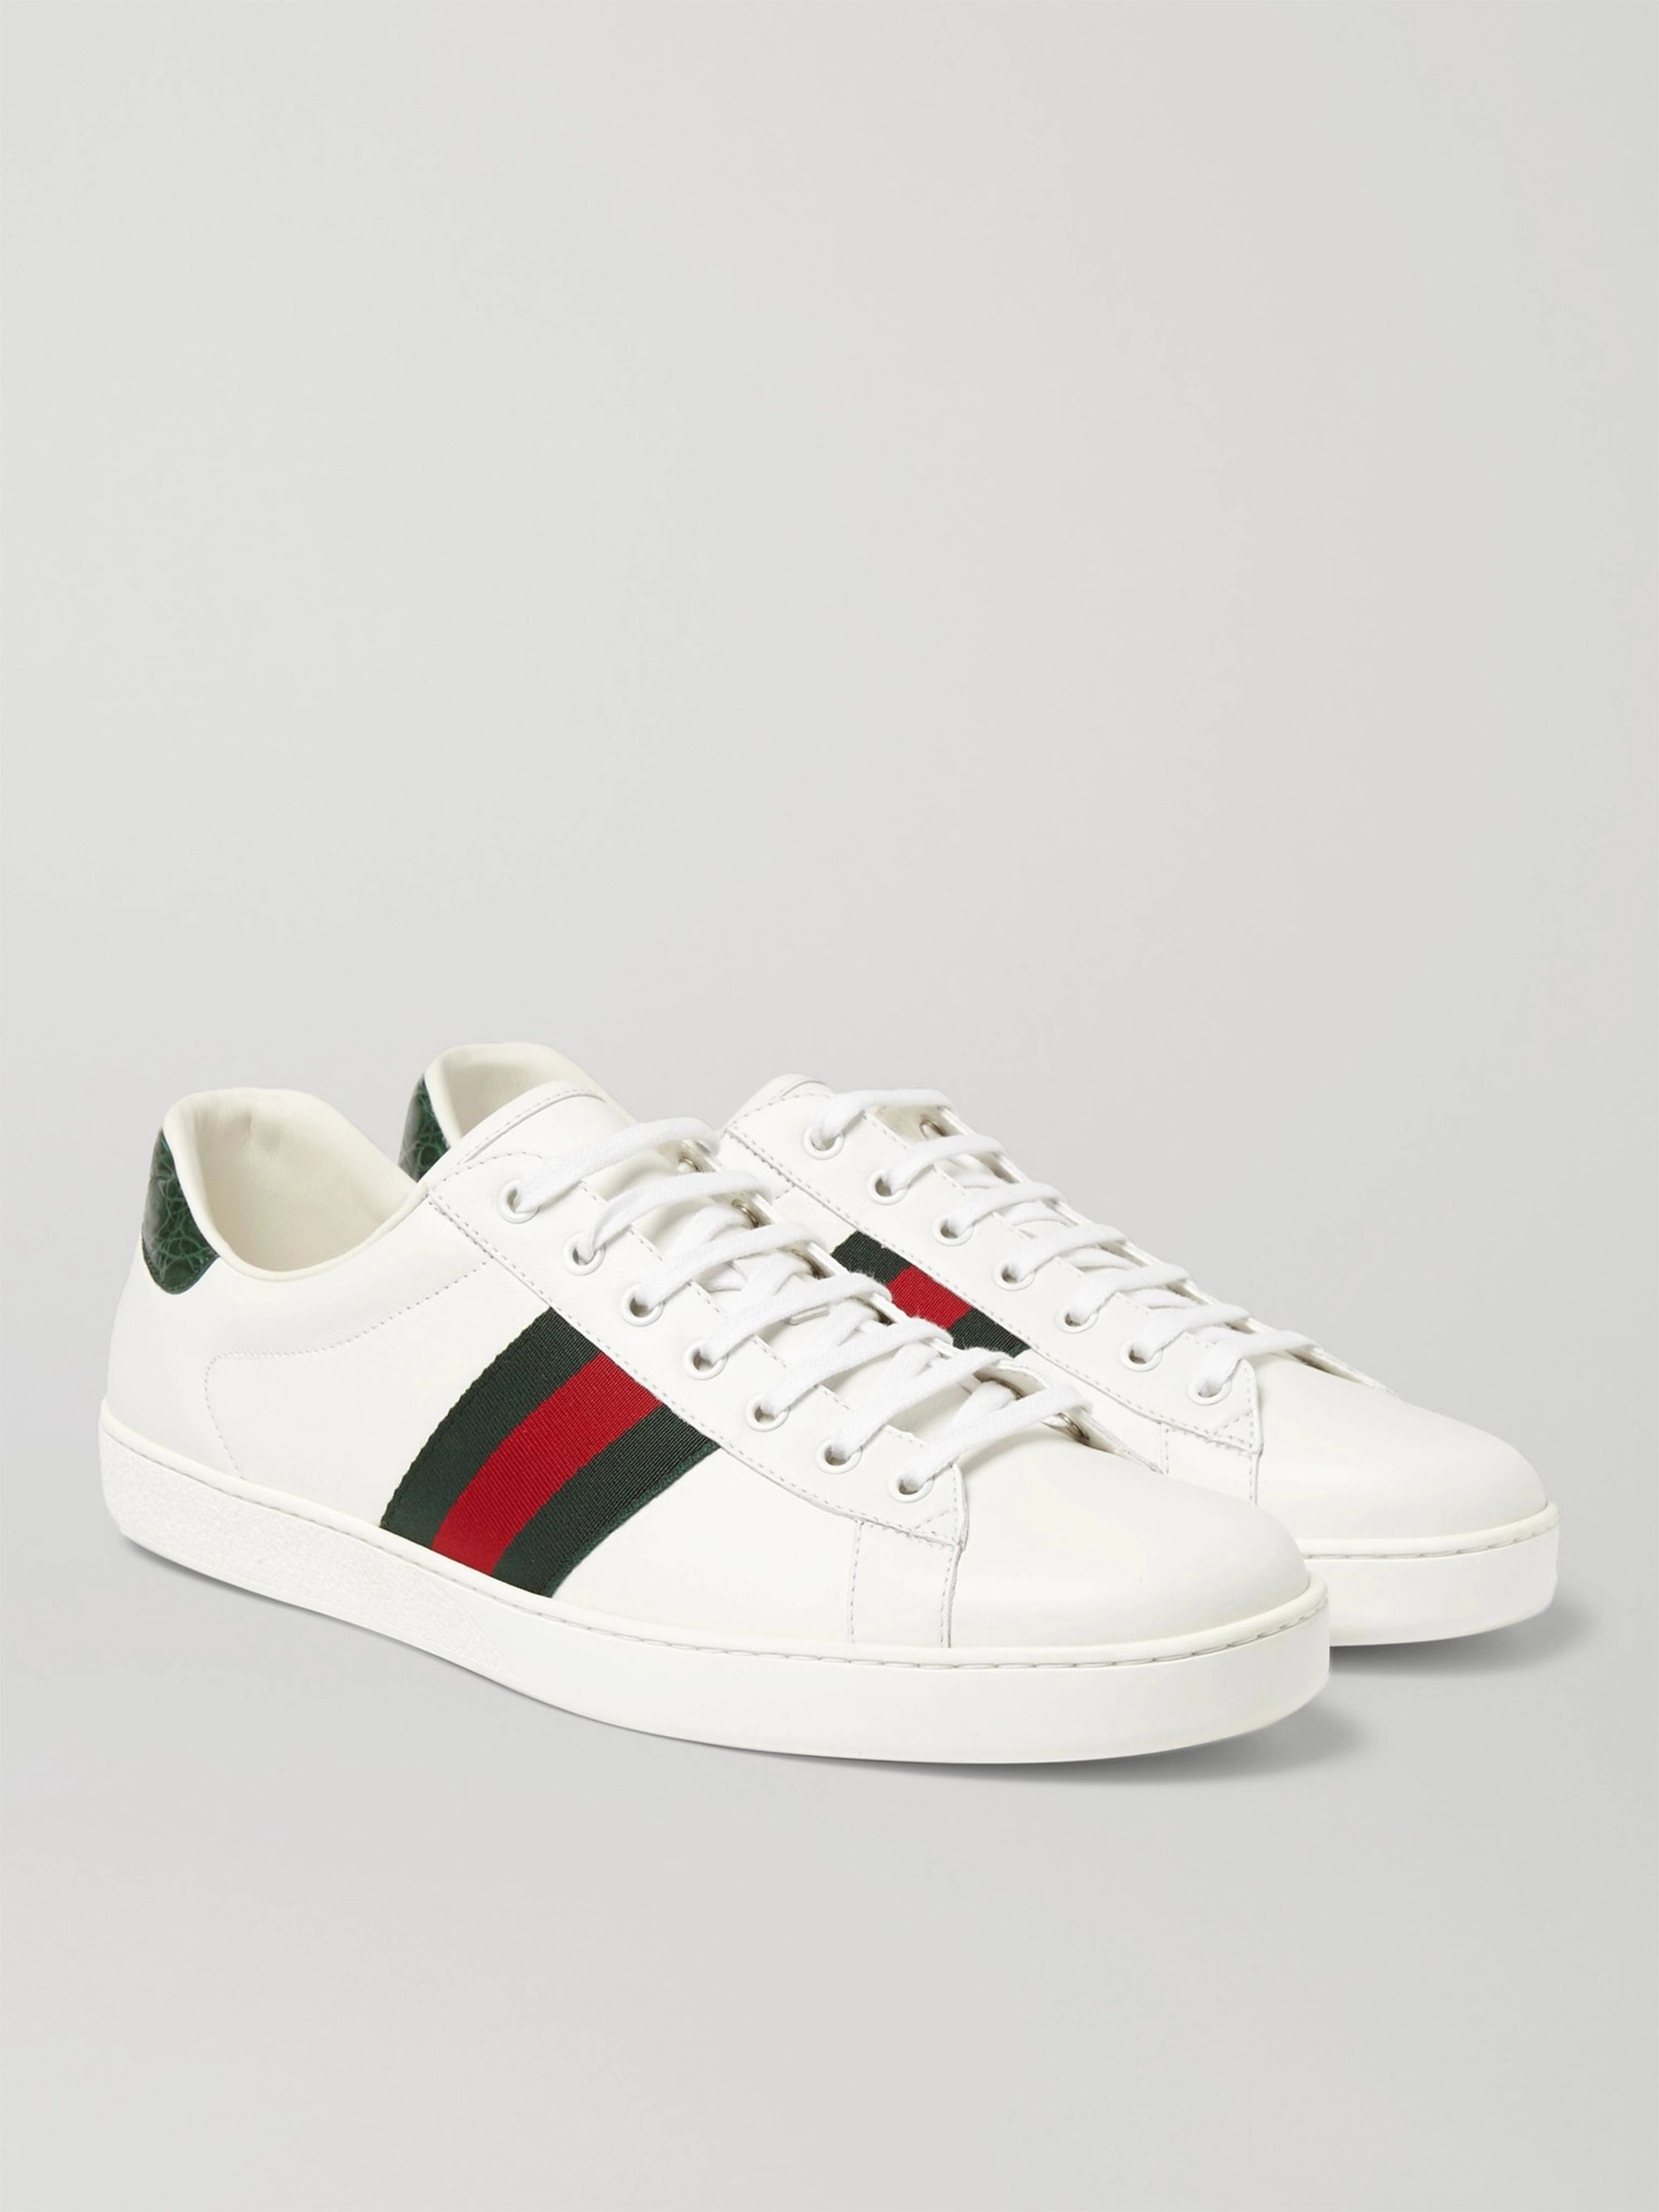 do gucci ace sneakers fit true to size